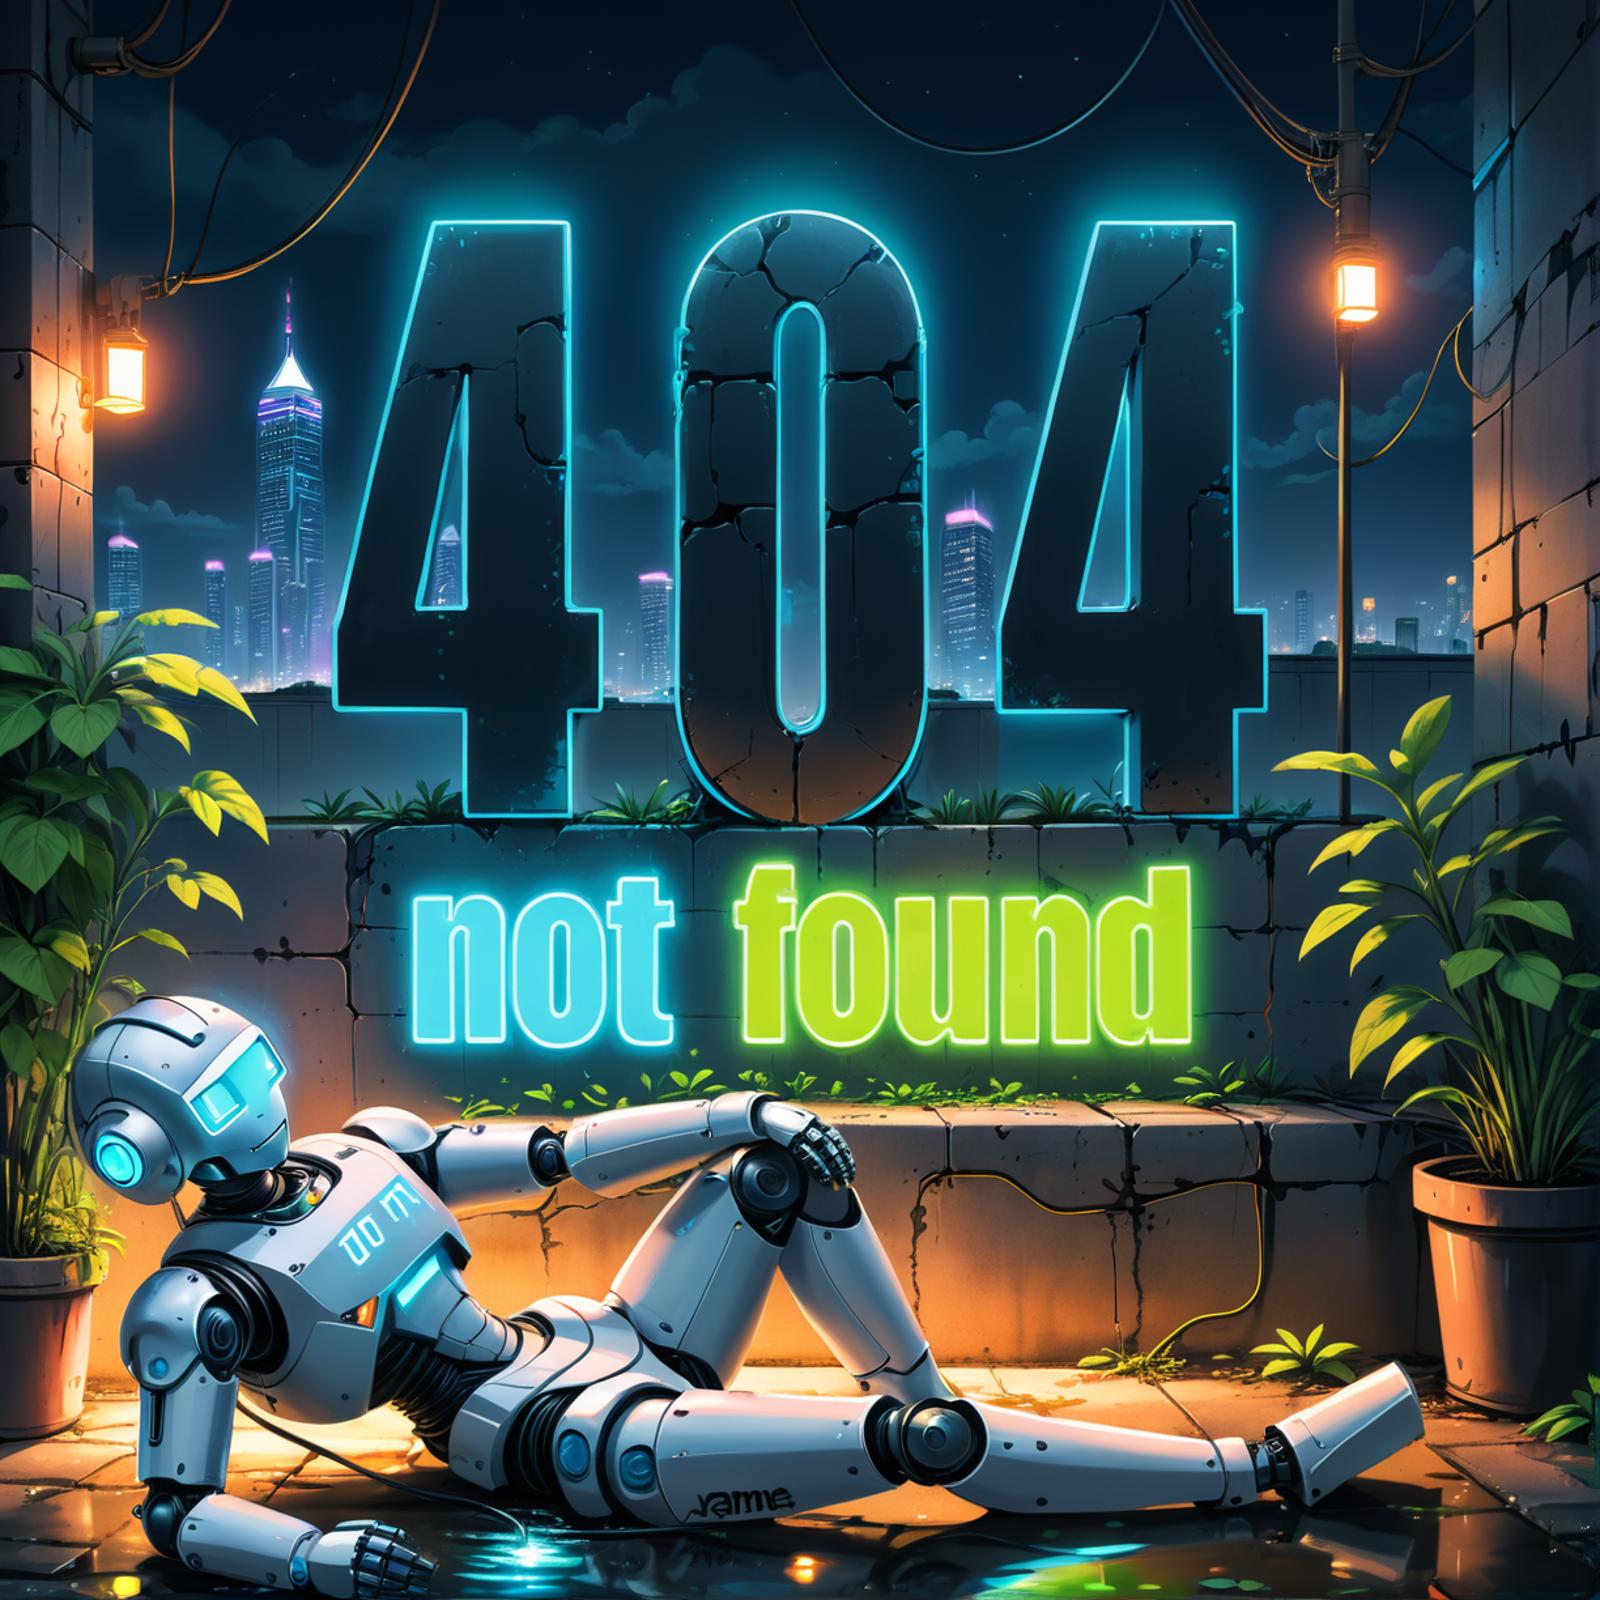 404 Not Found: Robot Robotics Poster with a Silhouette of a Robot on a Wall.